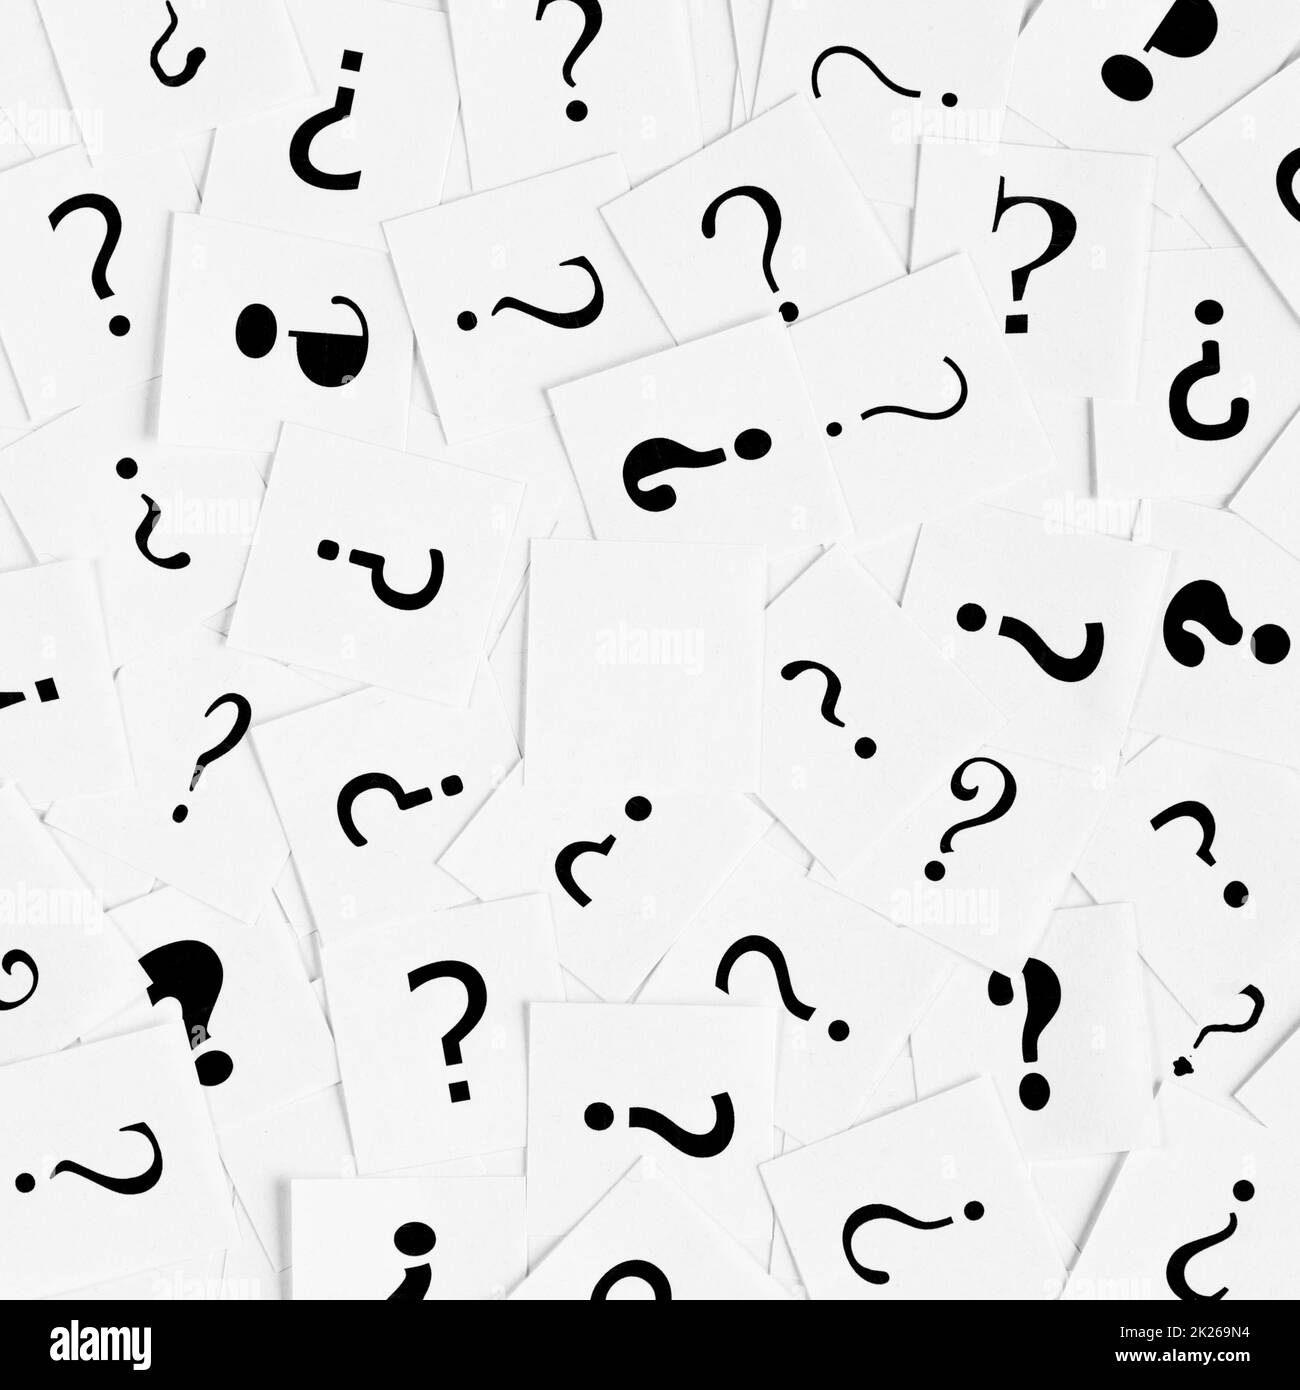 Pile of question mark signs scattered around Stock Photo